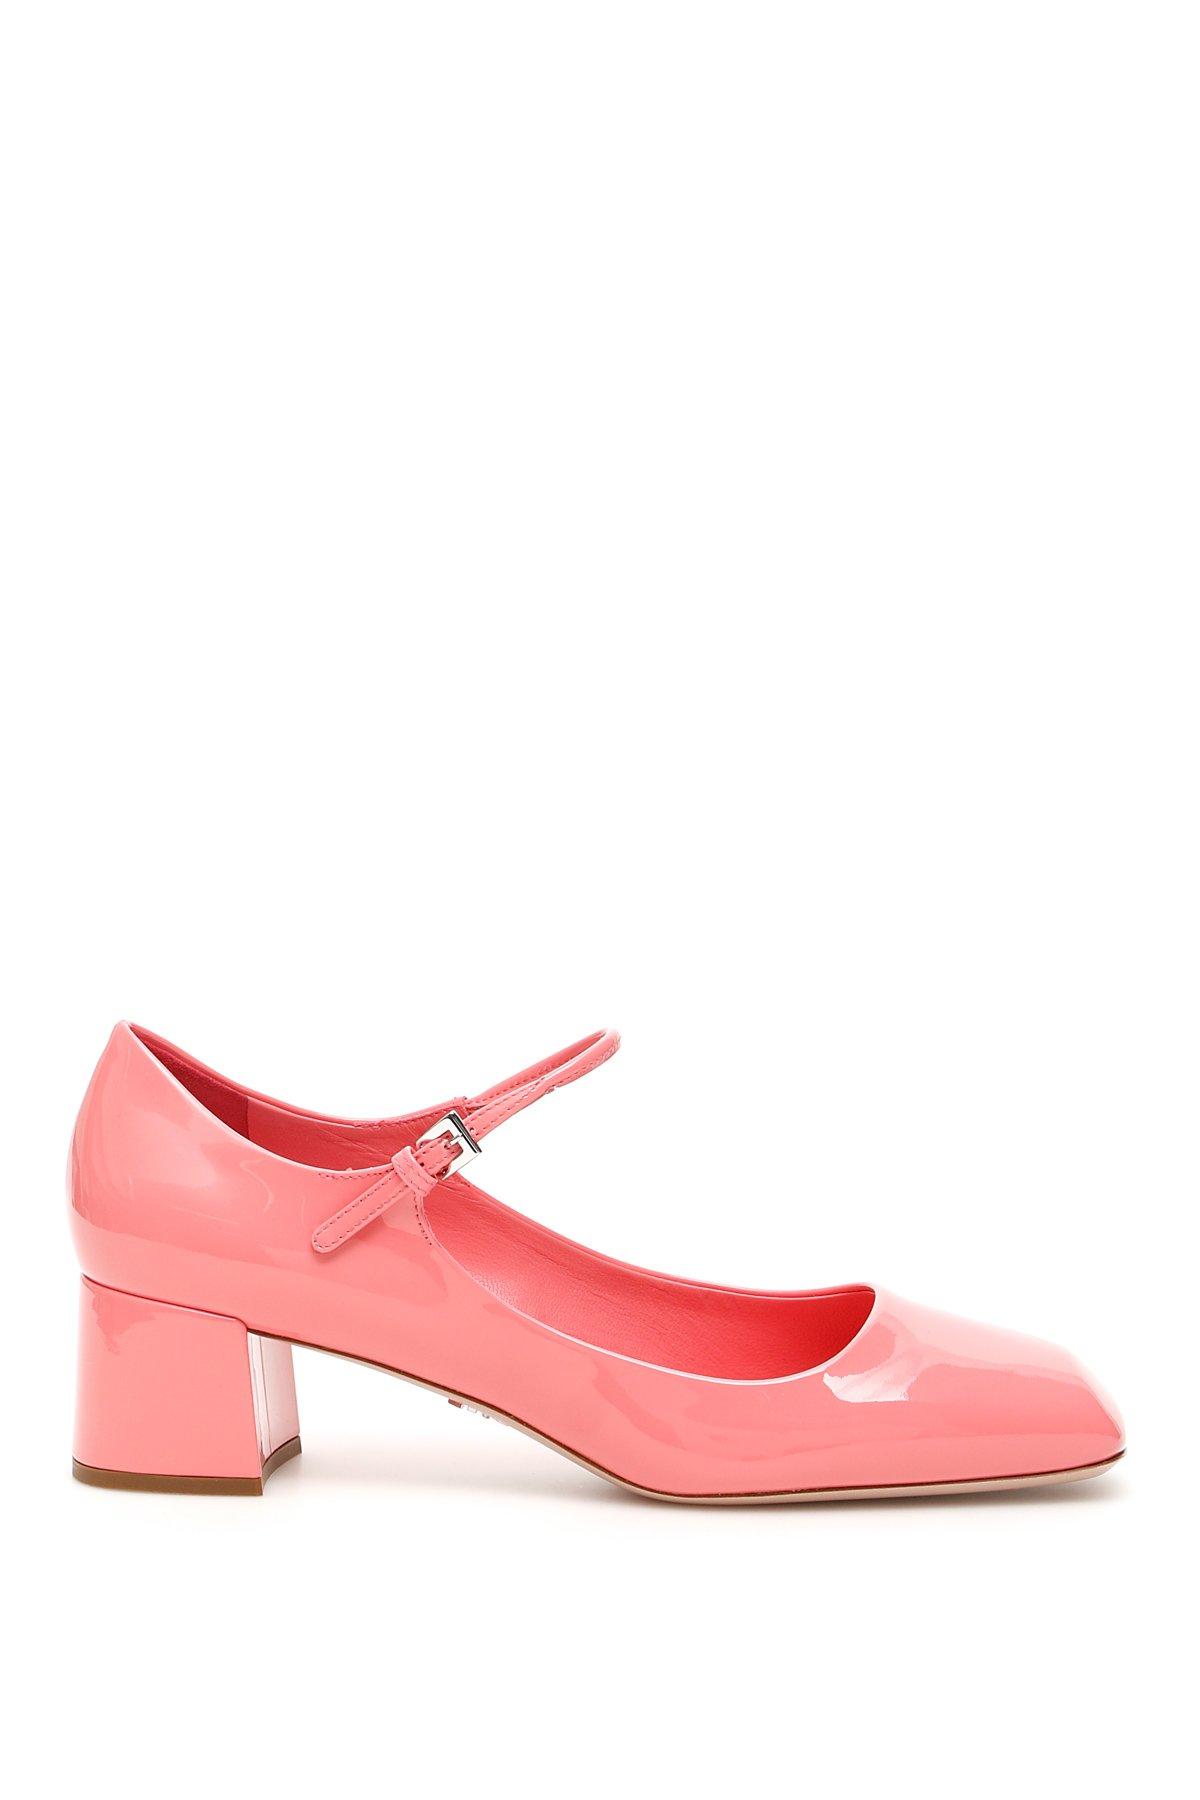 Prada Leather Mary Jane Pumps in Pink - Lyst